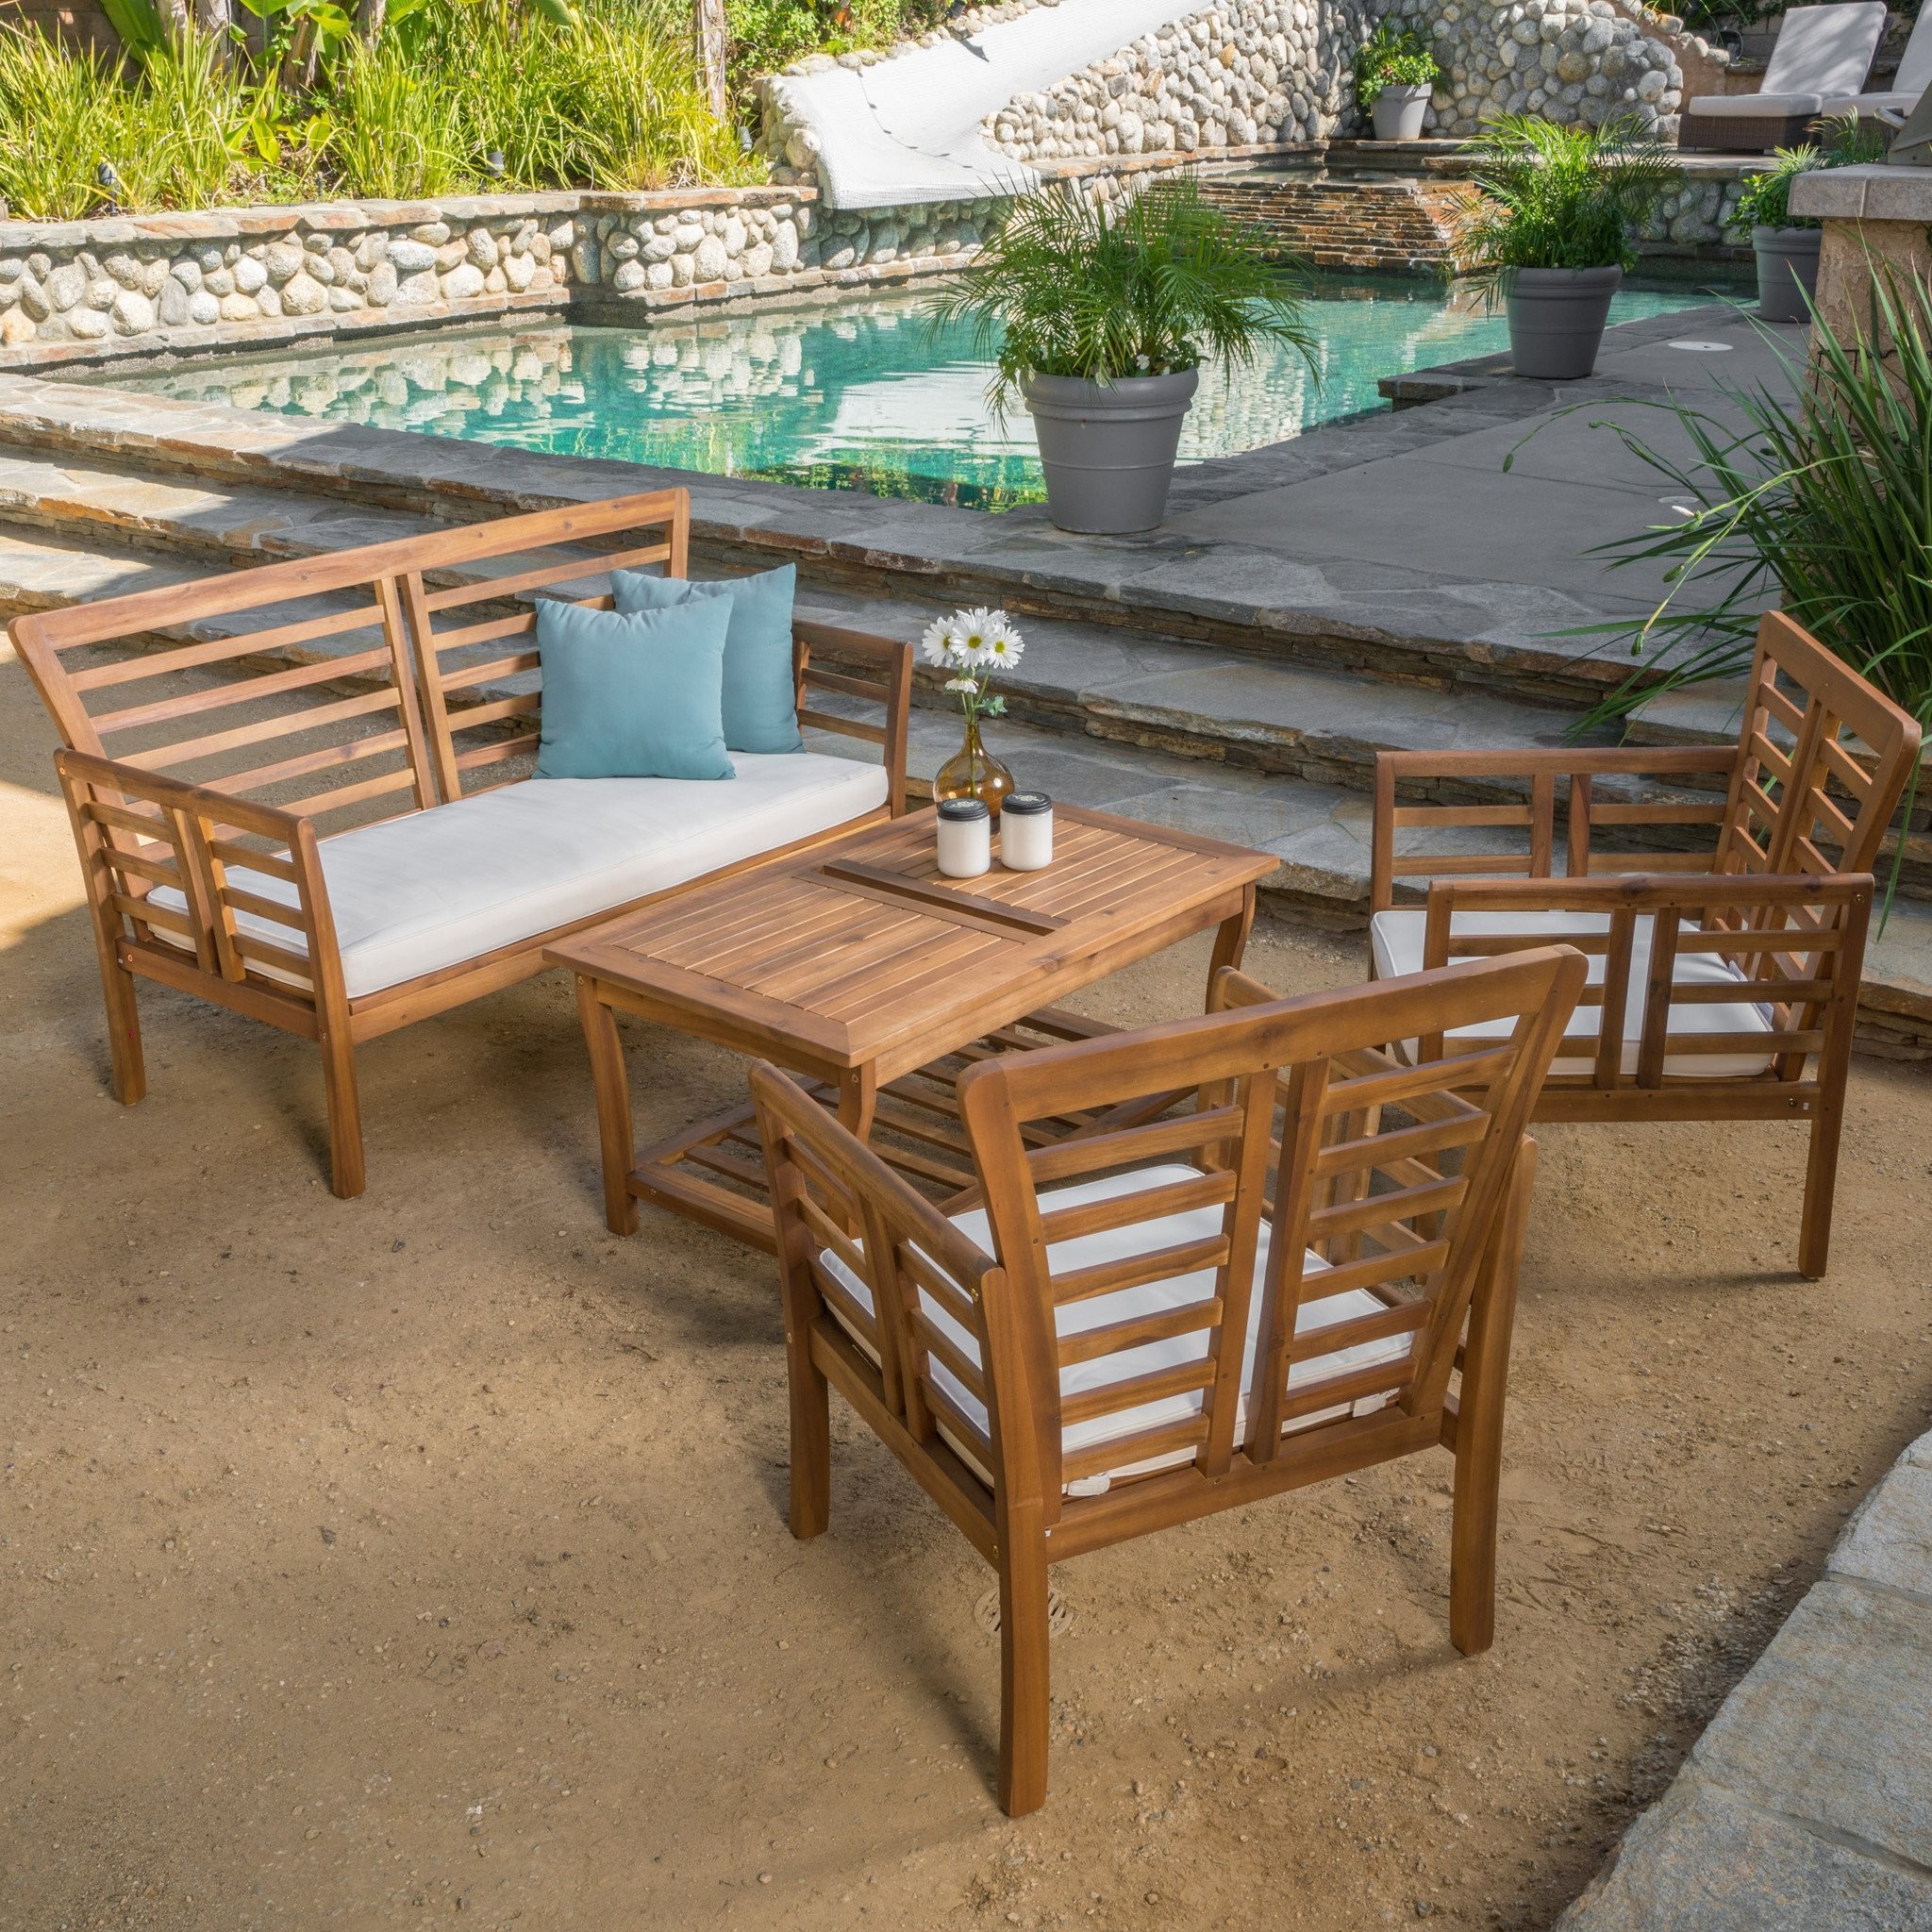 Louis Outdoor 4-piece Solid Wood Chat Set with Cus...